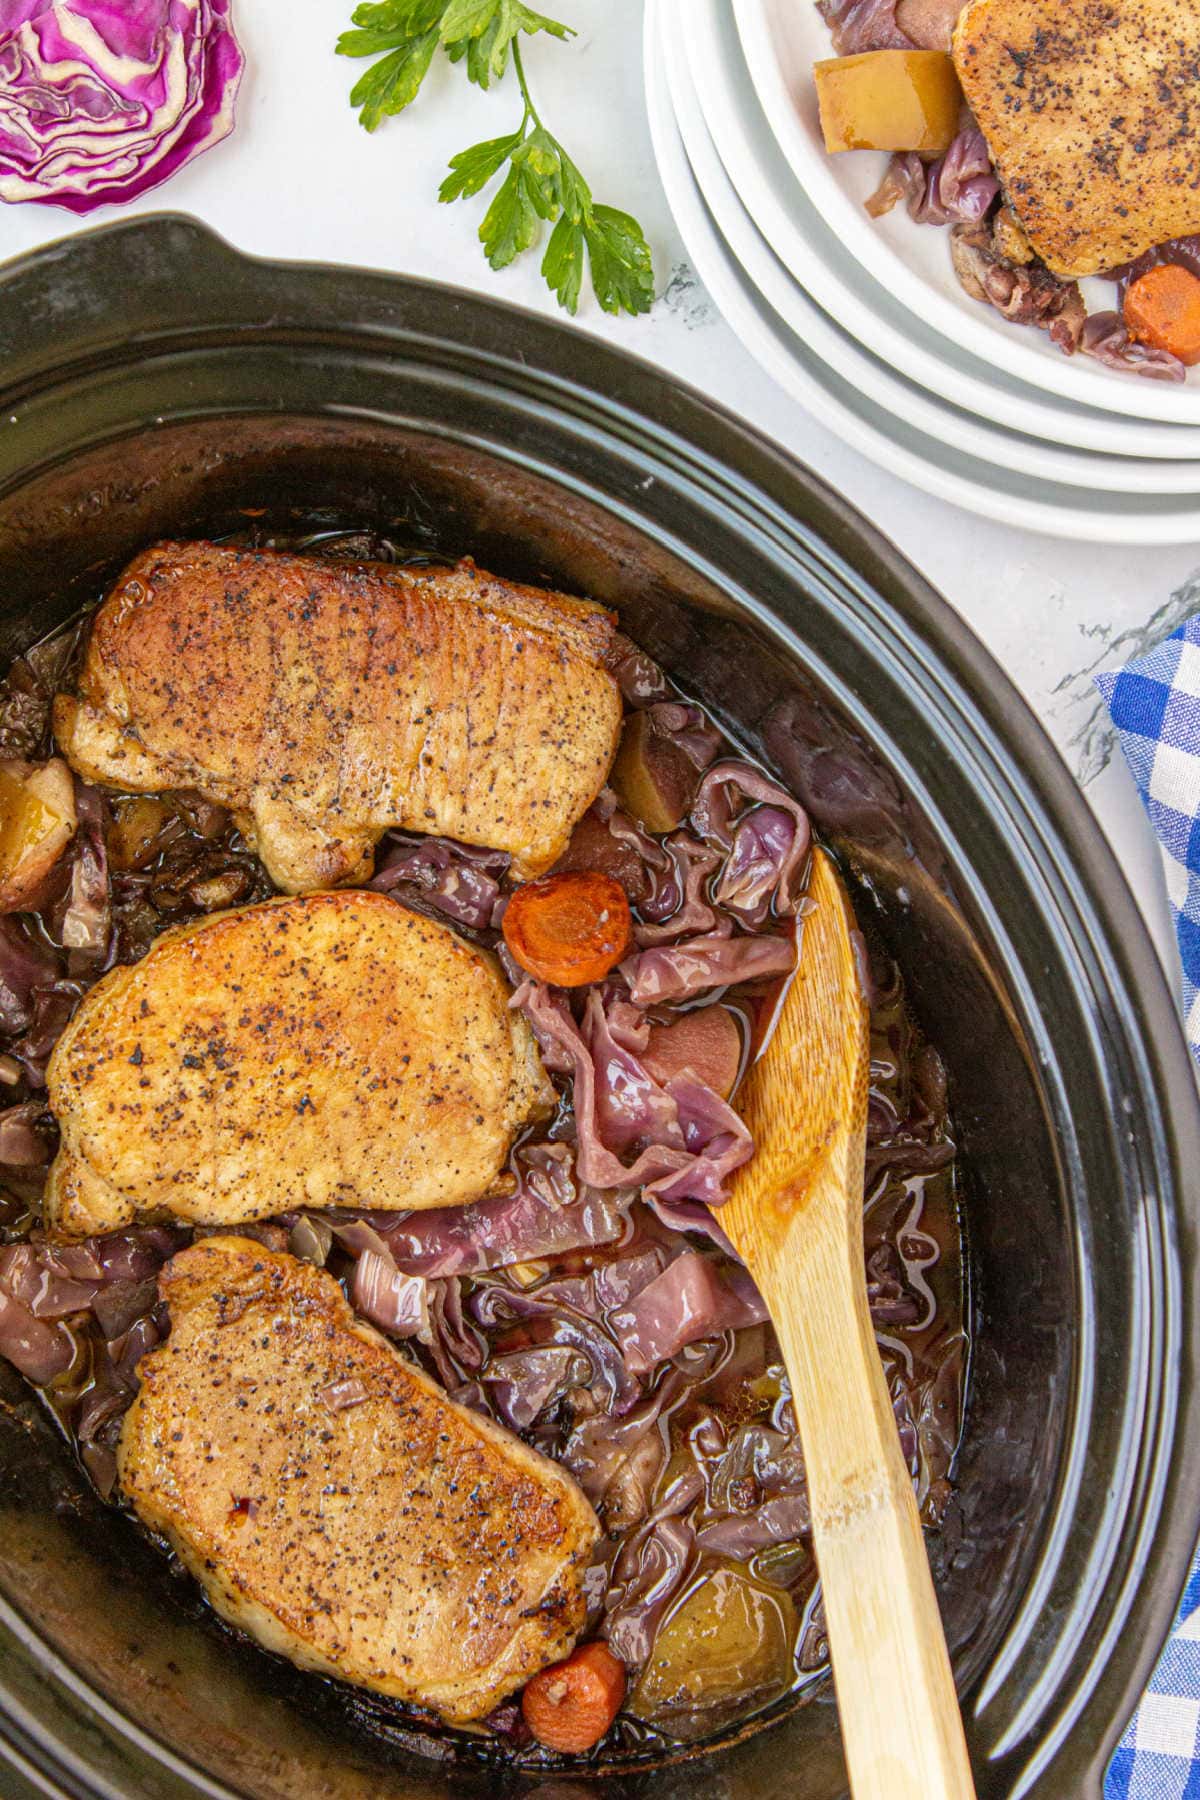 Braised pork and red cabbage mixed up in pot